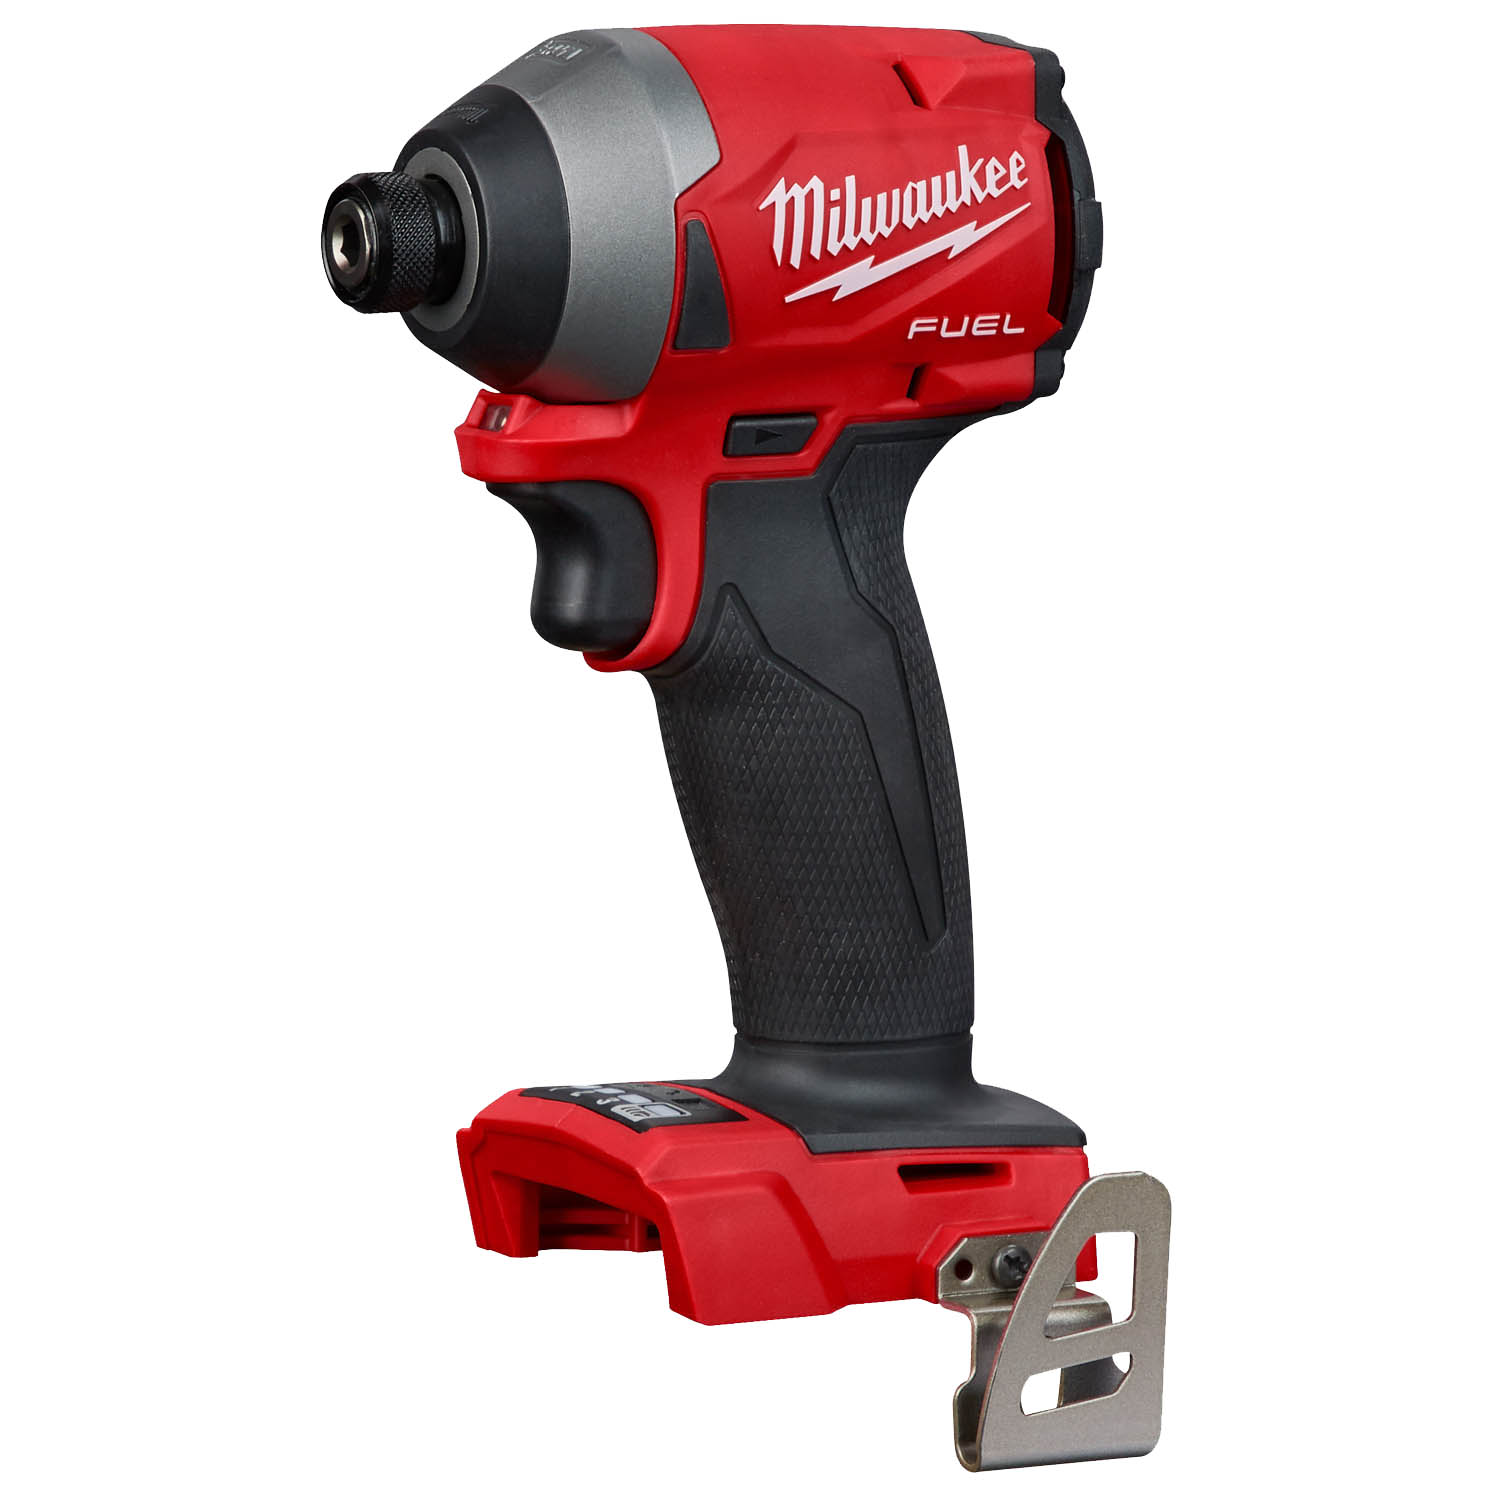 M18 FUEL 1/4 IN. HEX IMPACT DRIVER (TOOL ONLY)